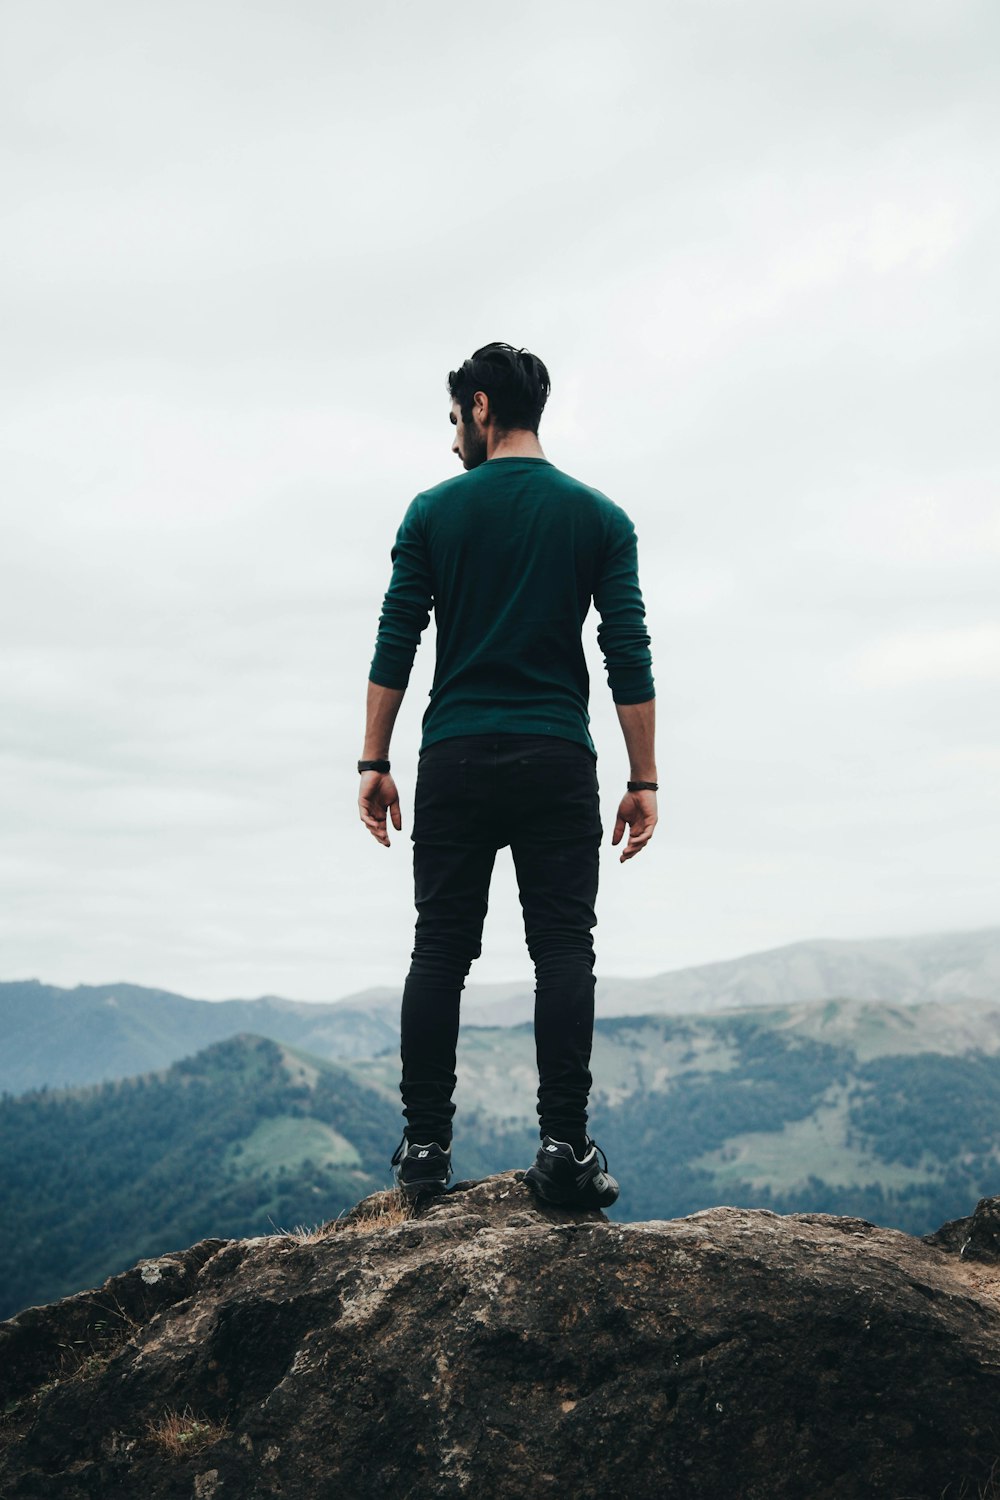 500+ [HQ] Standing Pictures | Download Free Images on Unsplash